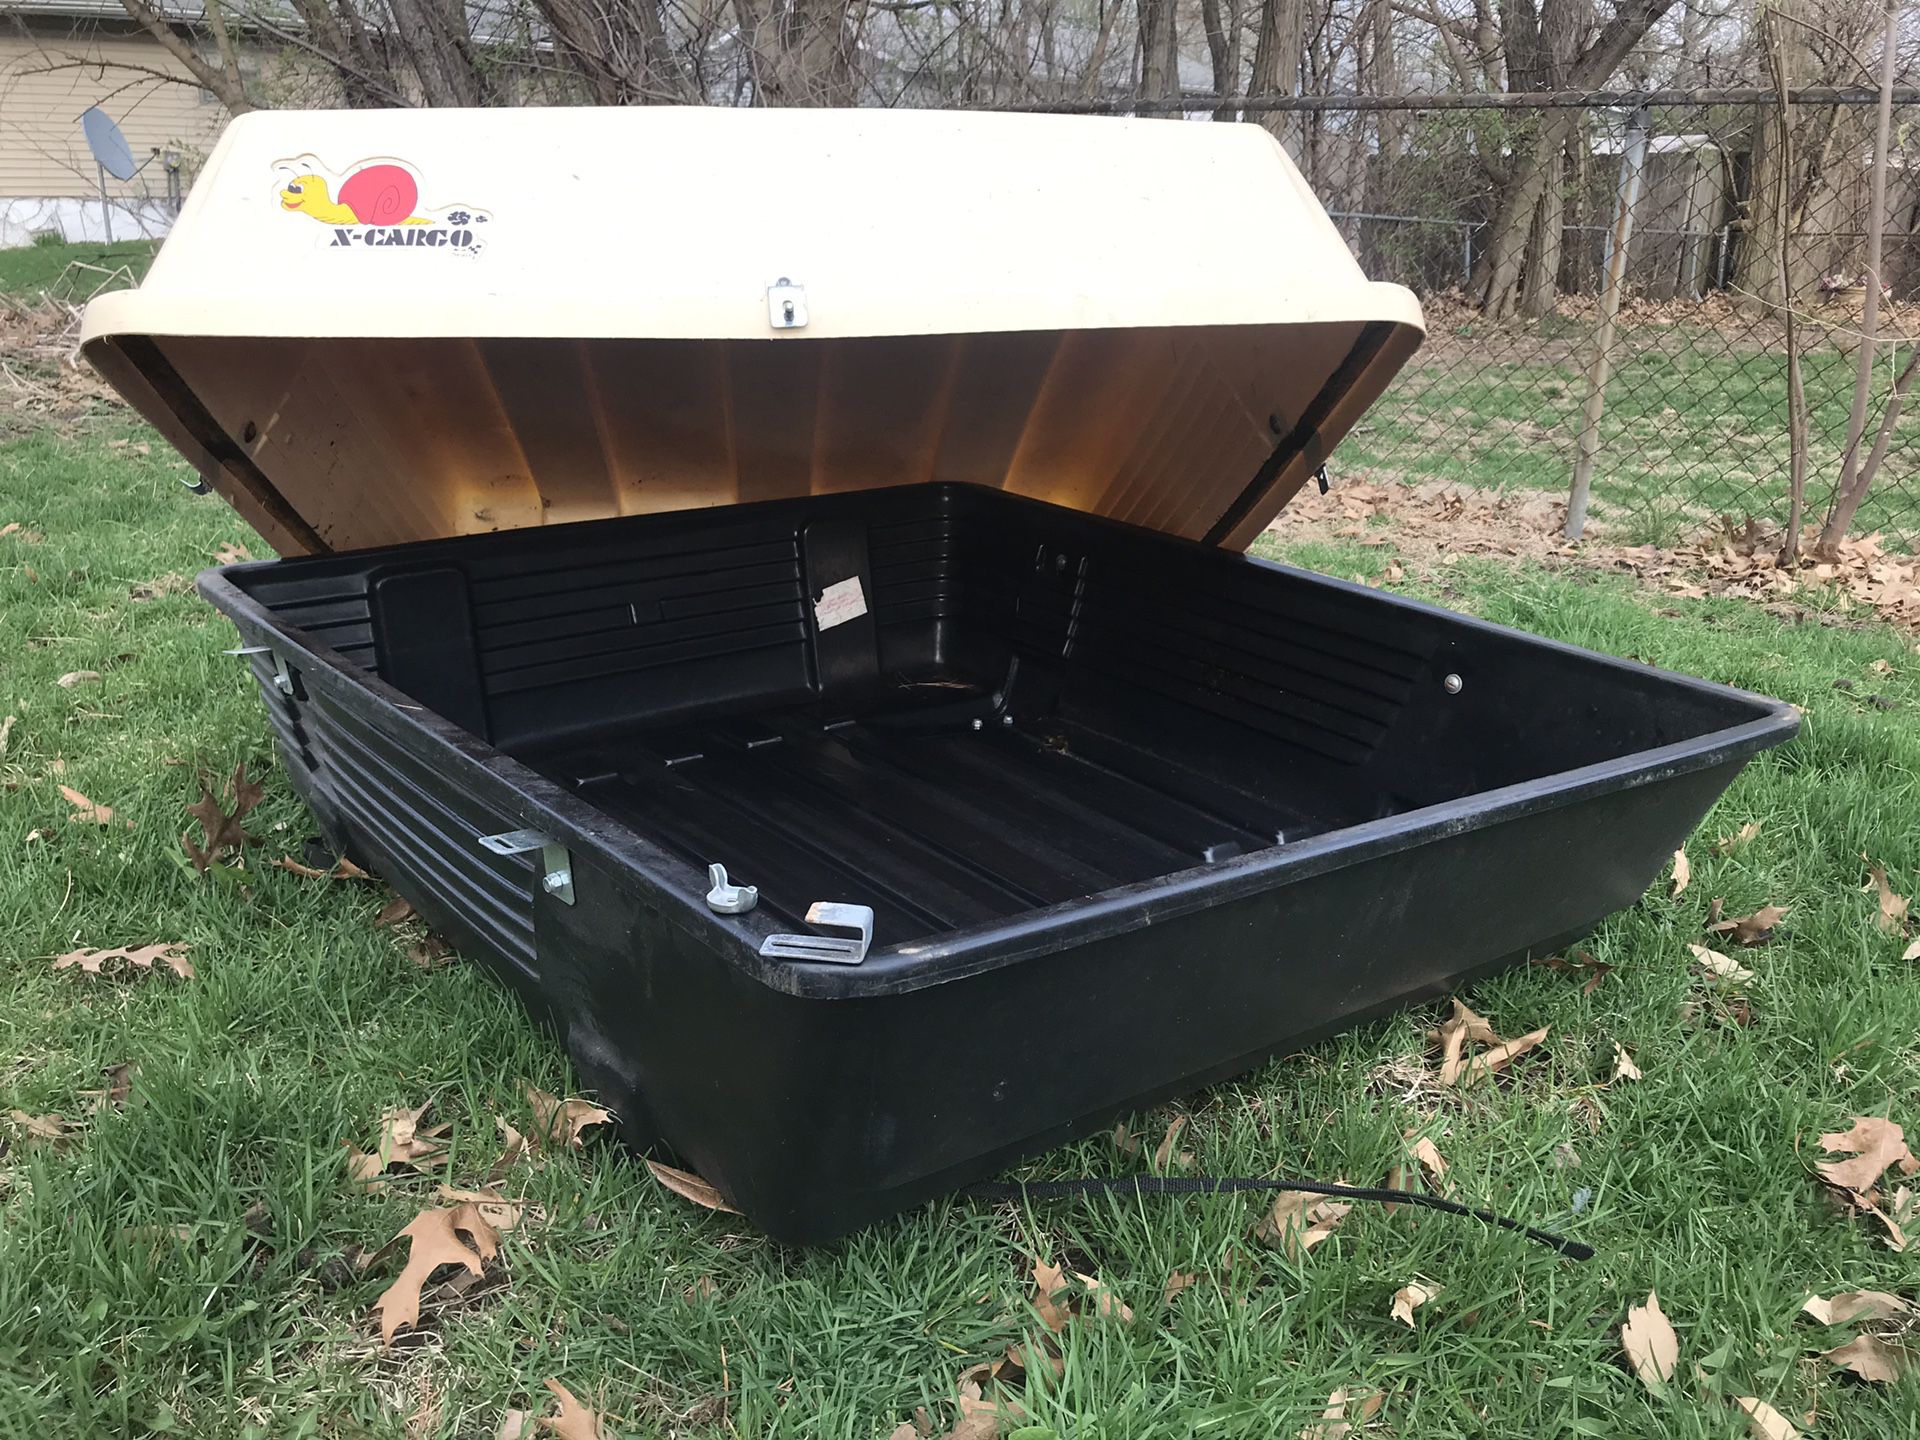 Sears X-Cargo Rooftop Carrier